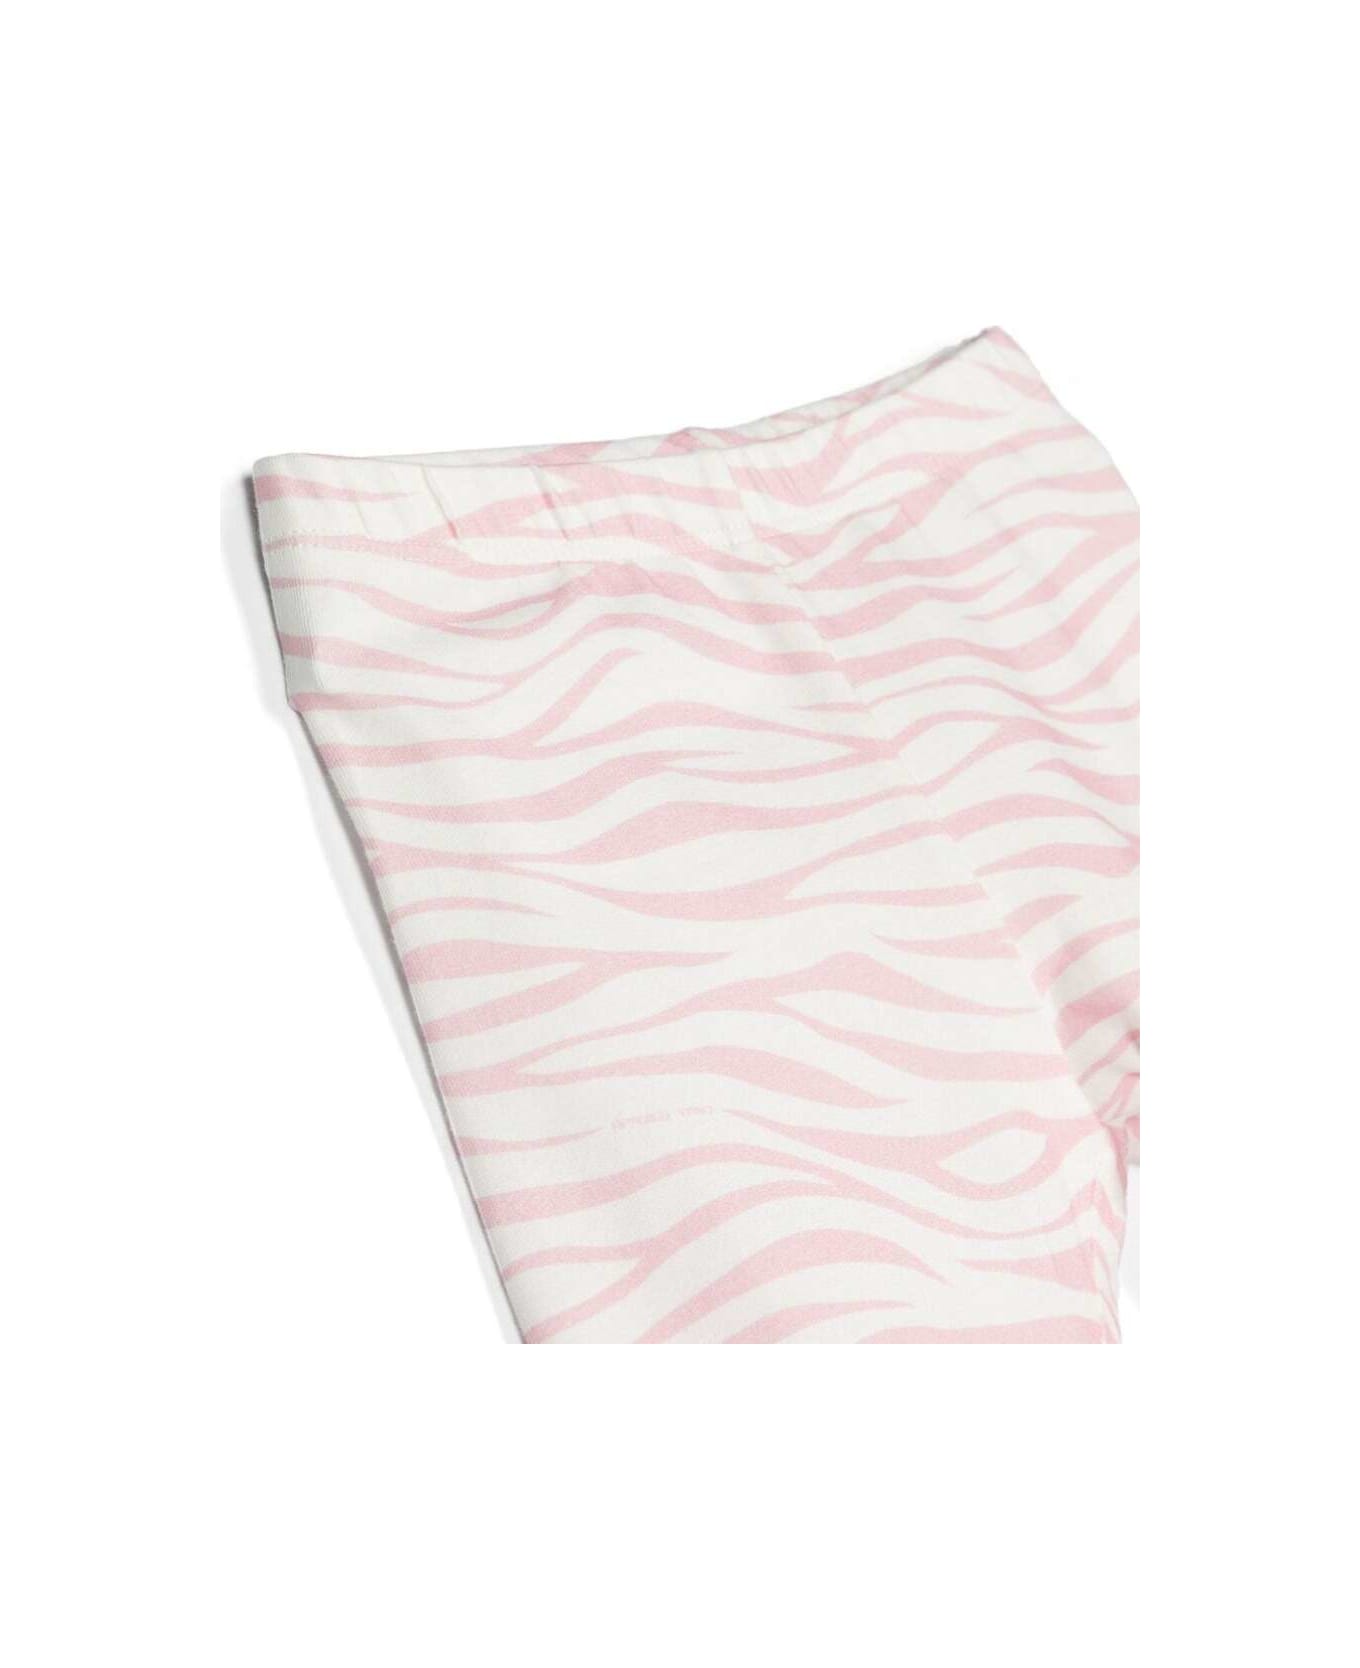 Chiara Ferragni Pink And White Leggings With Zebra And Logo Print In Stretch Cotton Girl - Pink